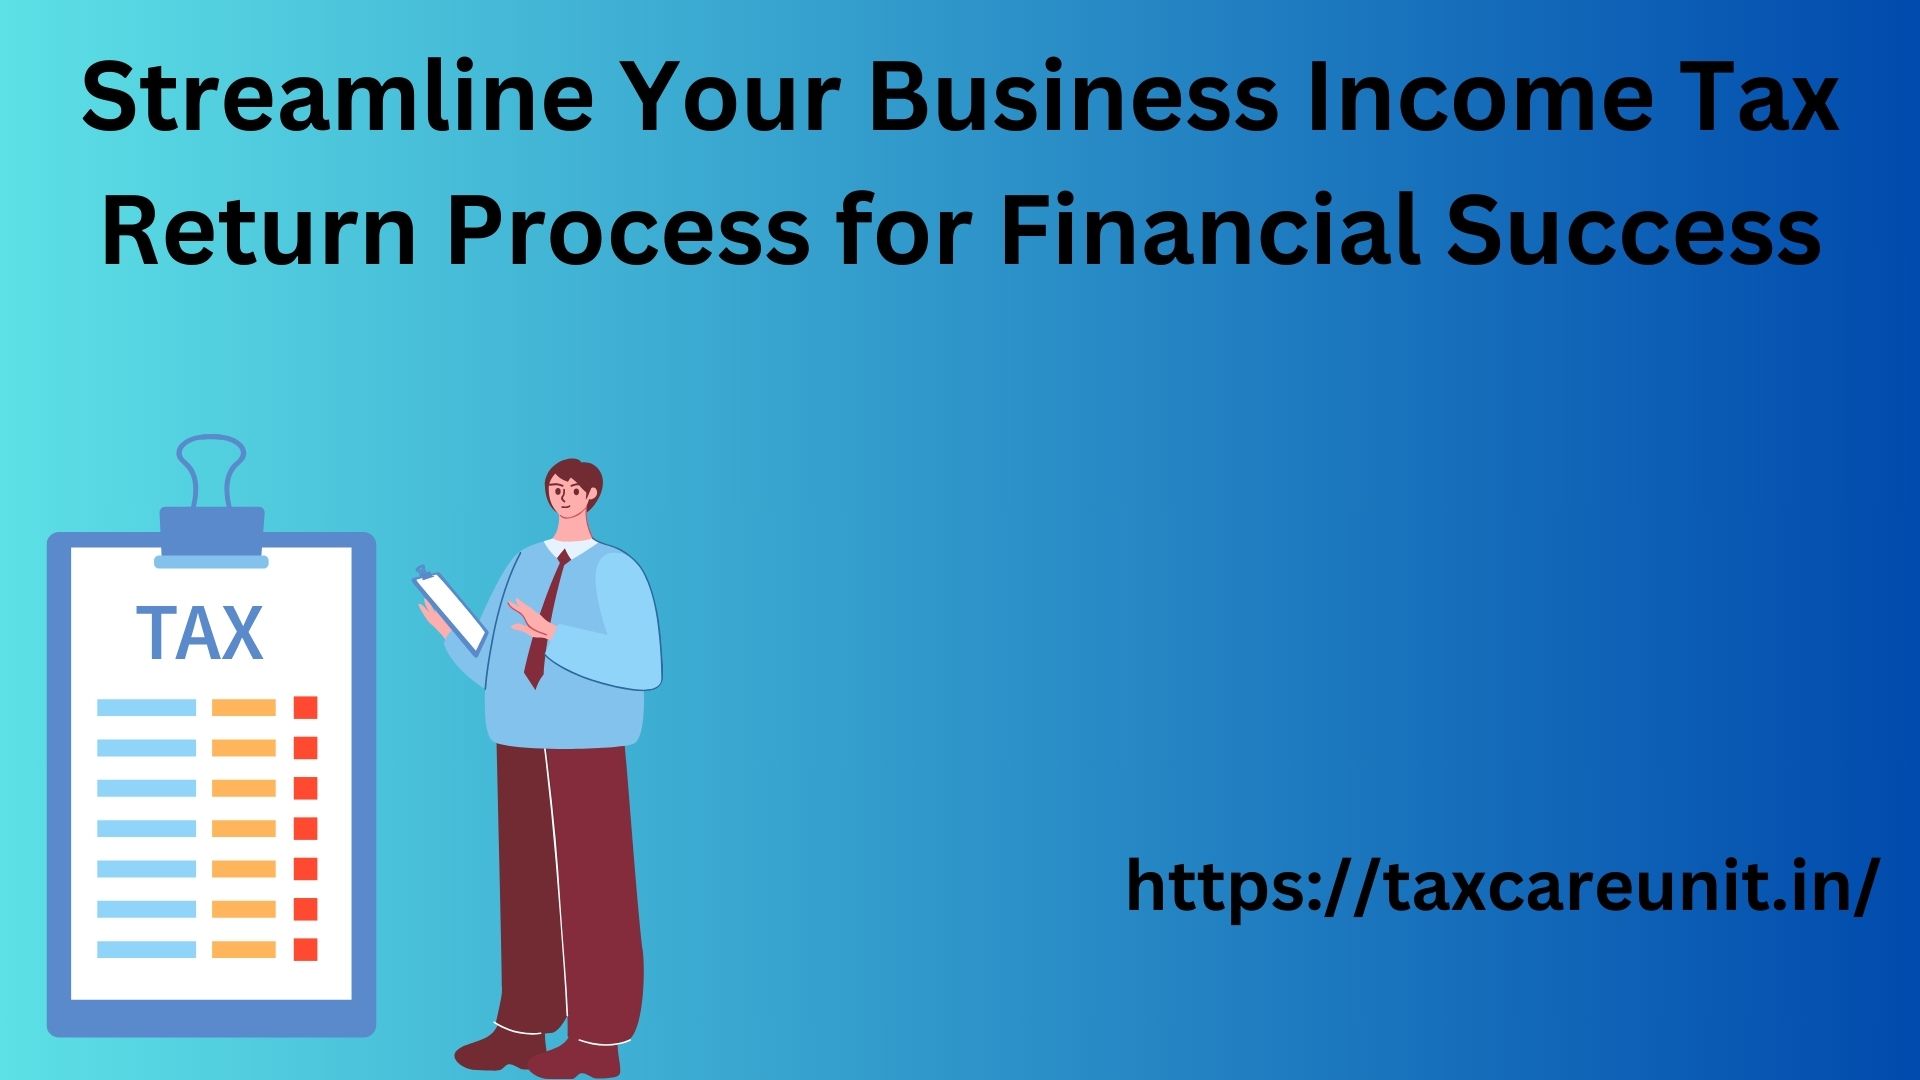 Streamline Your Business Income Tax Return Process for Financial Success